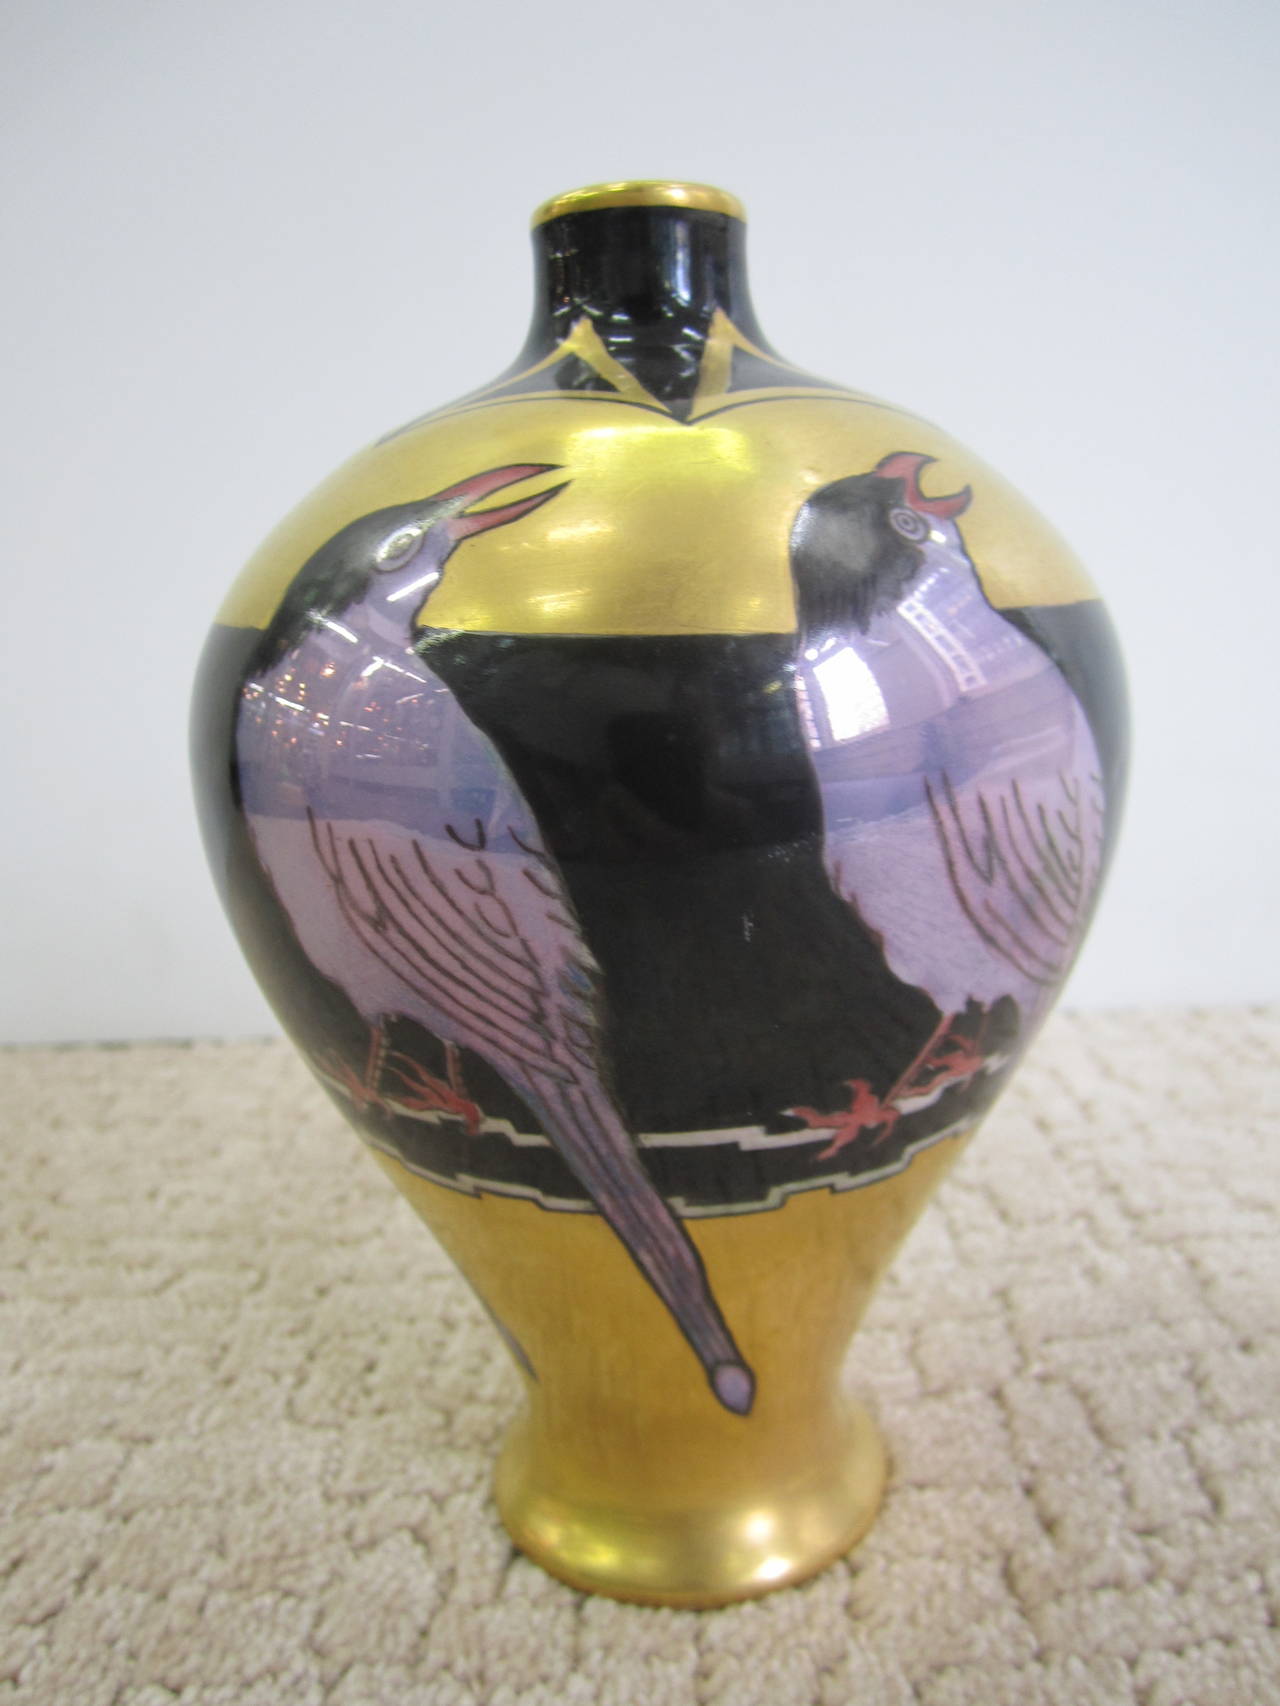 A beautiful French Art Deco black and gold hand-painted Limoges porcelain vase with bird design. Other hand-painted colors include: purple and red on the bird's feet. From France, circa 1930s.

Item available here online. By request, item can be